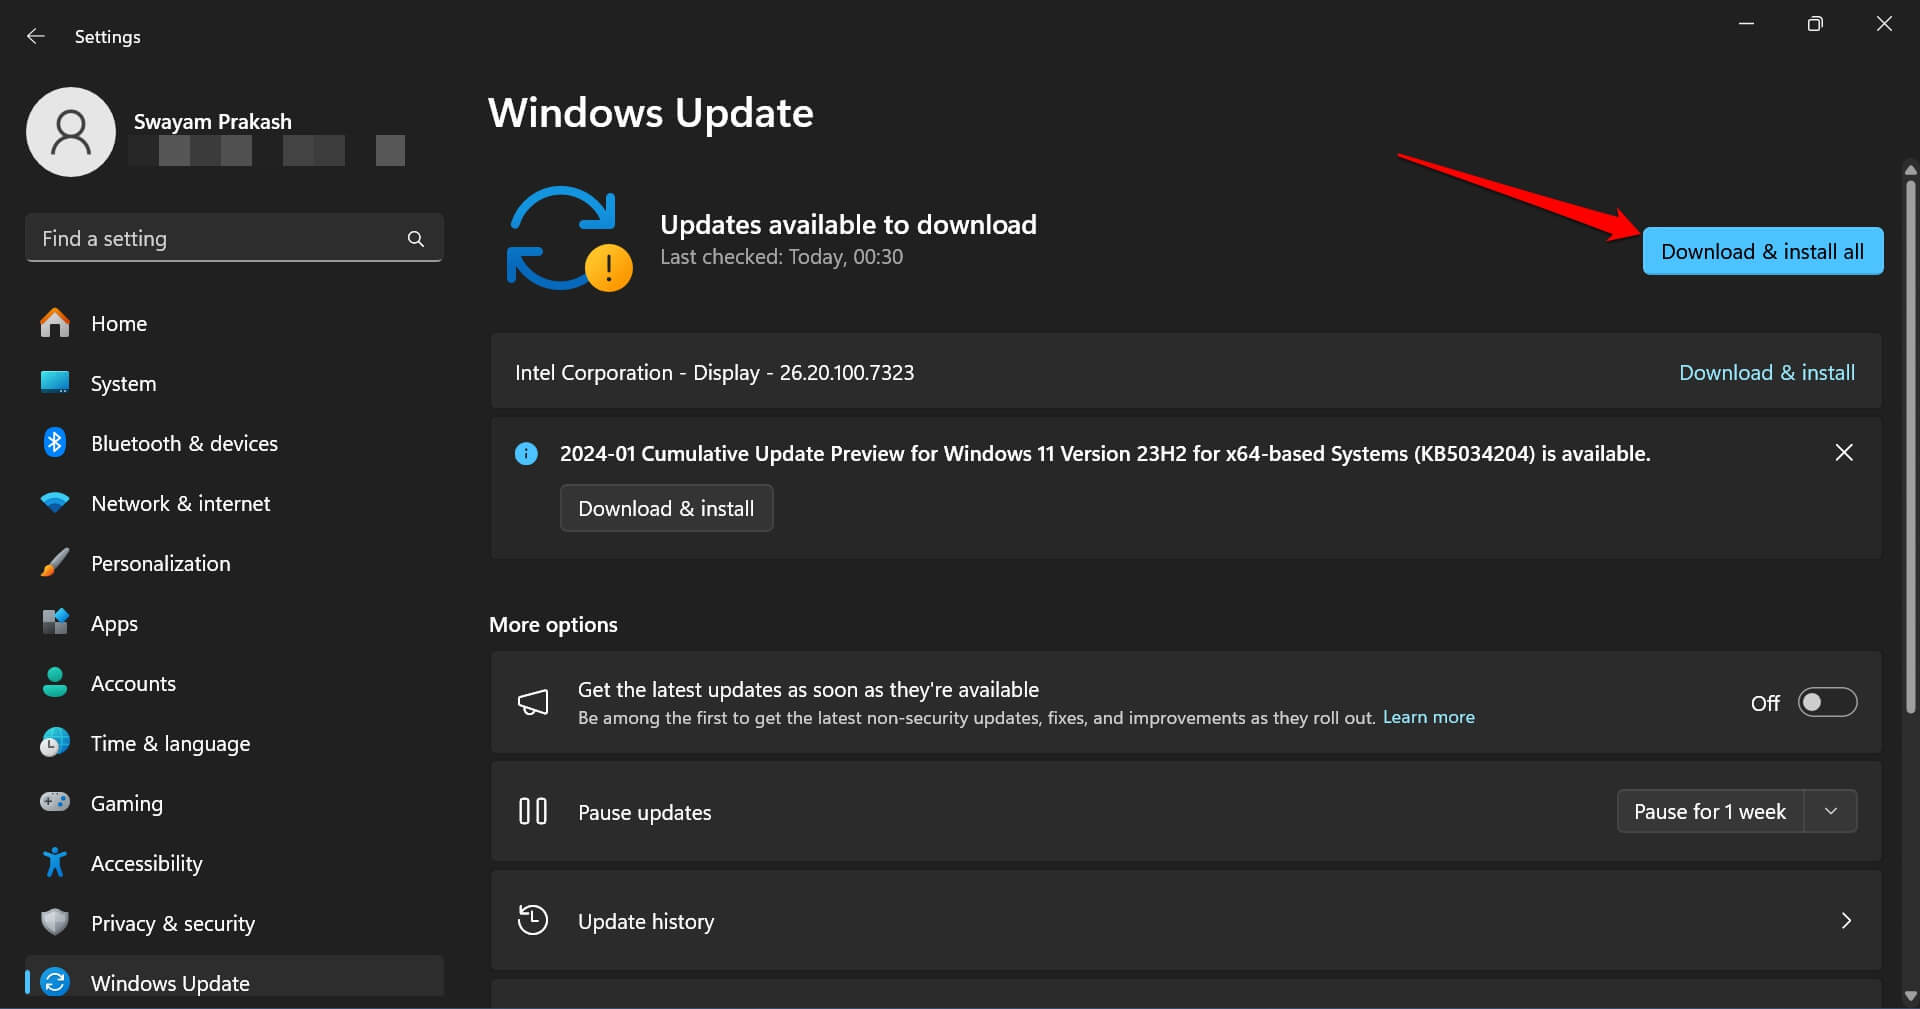 windows-11-update-available-to-download-1